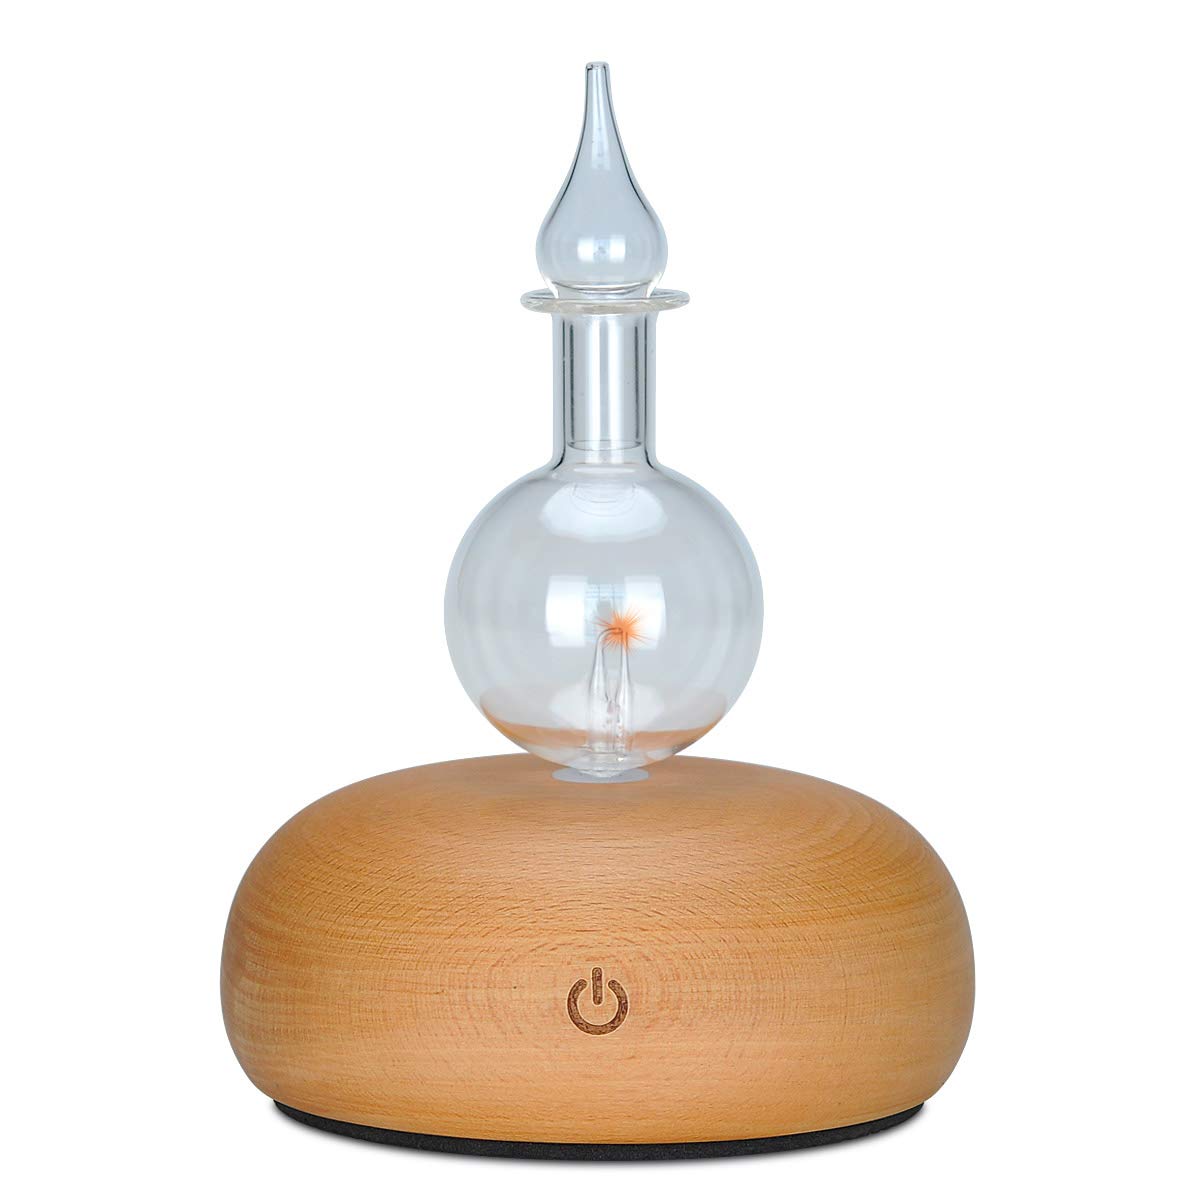 Vintage Design Touch Mode Nebulizing Diffuser Pure Essential Oil Aromatherapy Diffuser with Mist Adjustable & LED Light